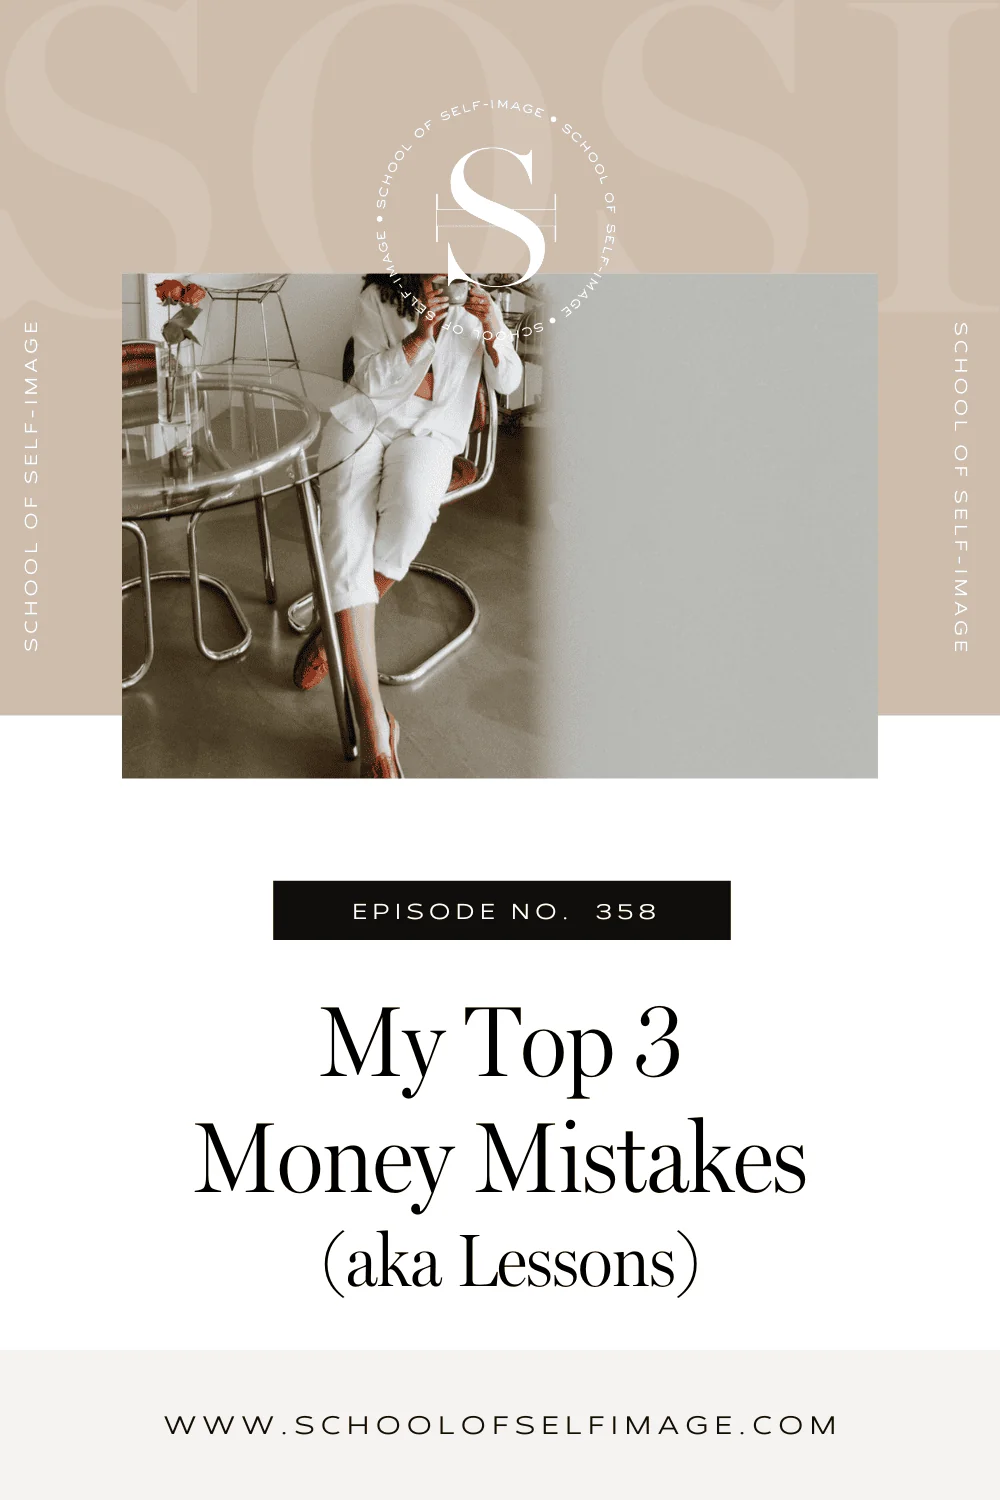 My Top 3 Money Mistakes (AKA Lessons)